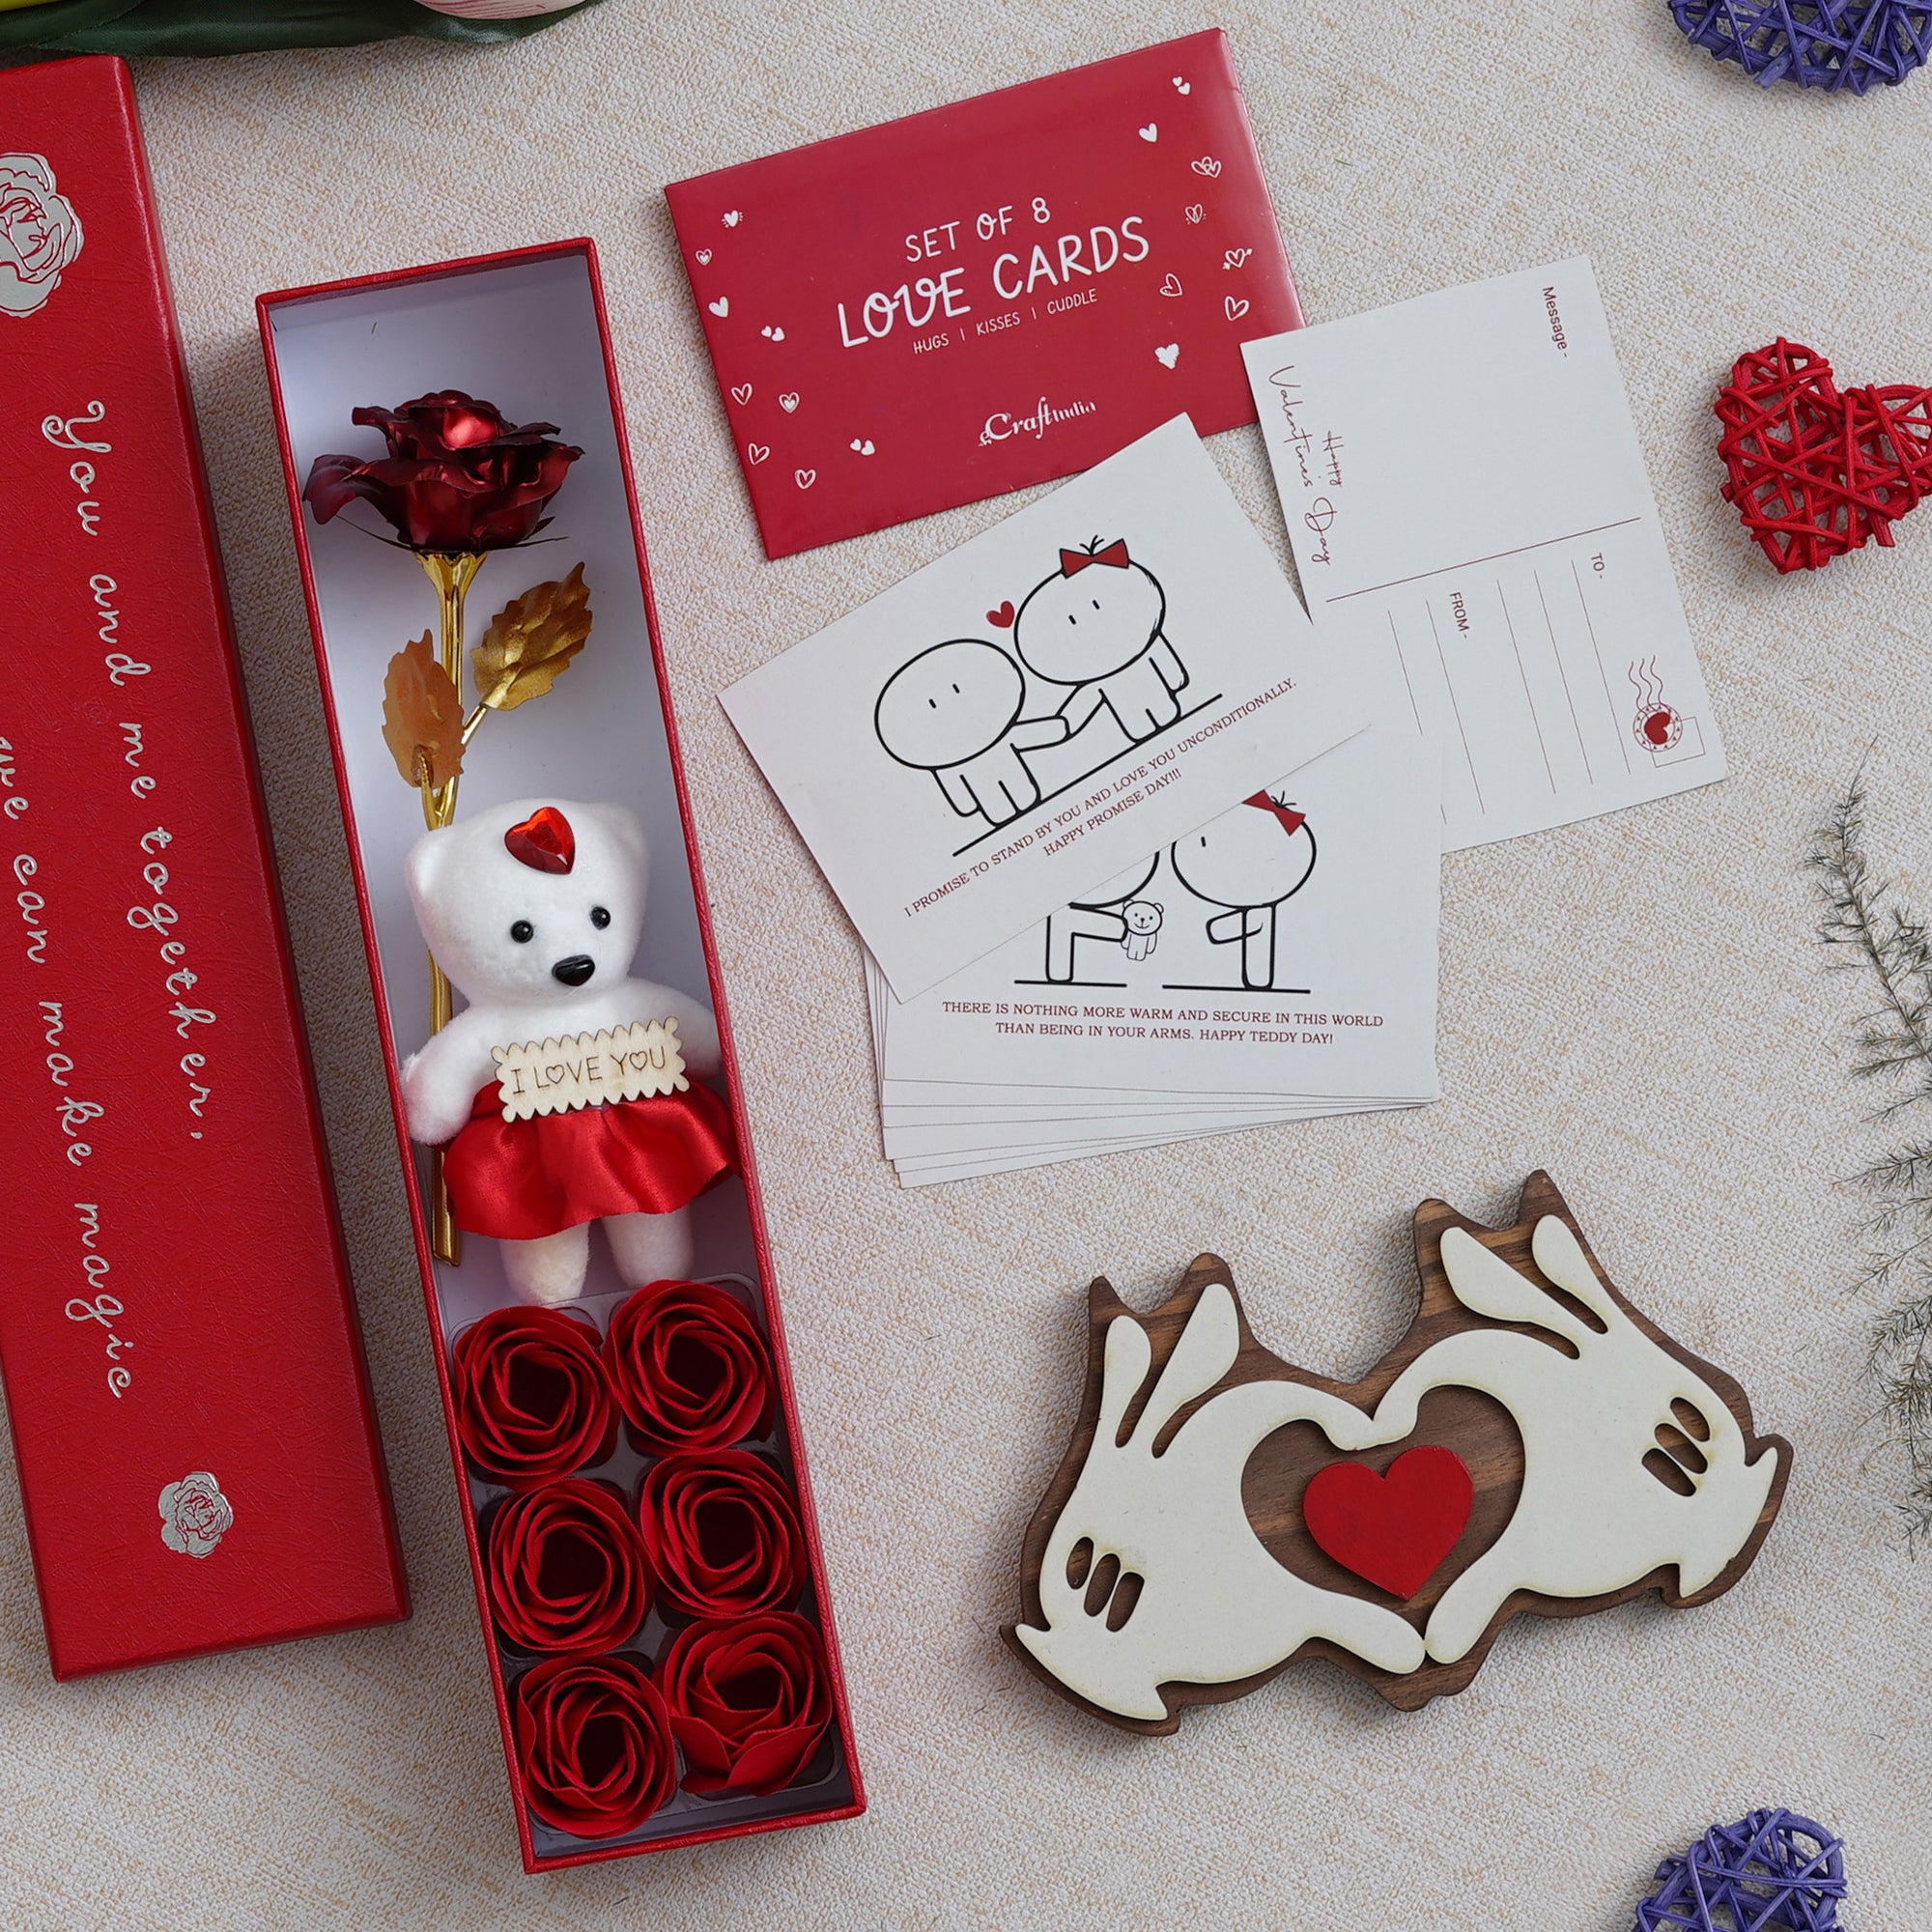 Valentine Combo of Pack of 8 Love Gift Cards, Red Gift Box with Teddy & Roses, Hands Showcasing Red Heart Gift Set